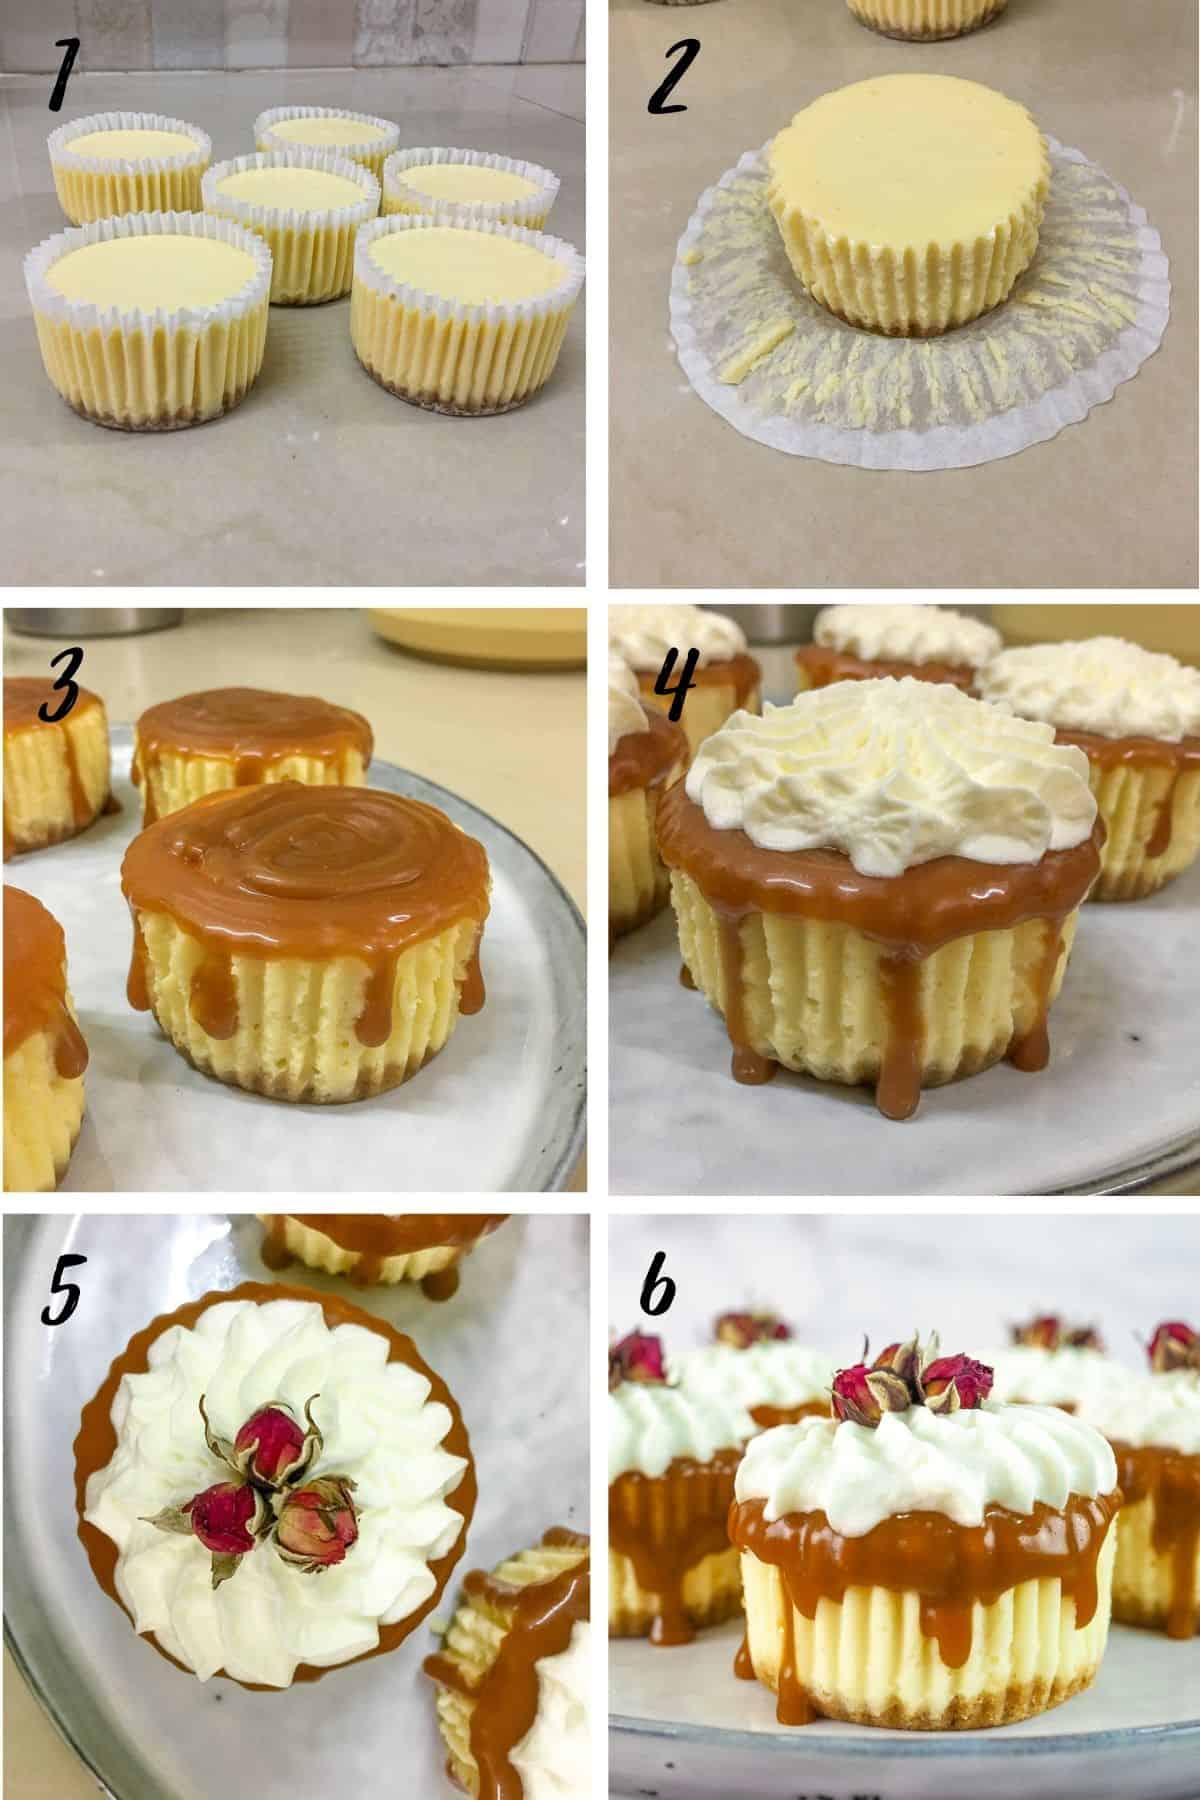 A poster of 6 images showing how to decorate mini salted caramel cheesecakes with salted caramel sauce, whipped cream and dried rose buds.